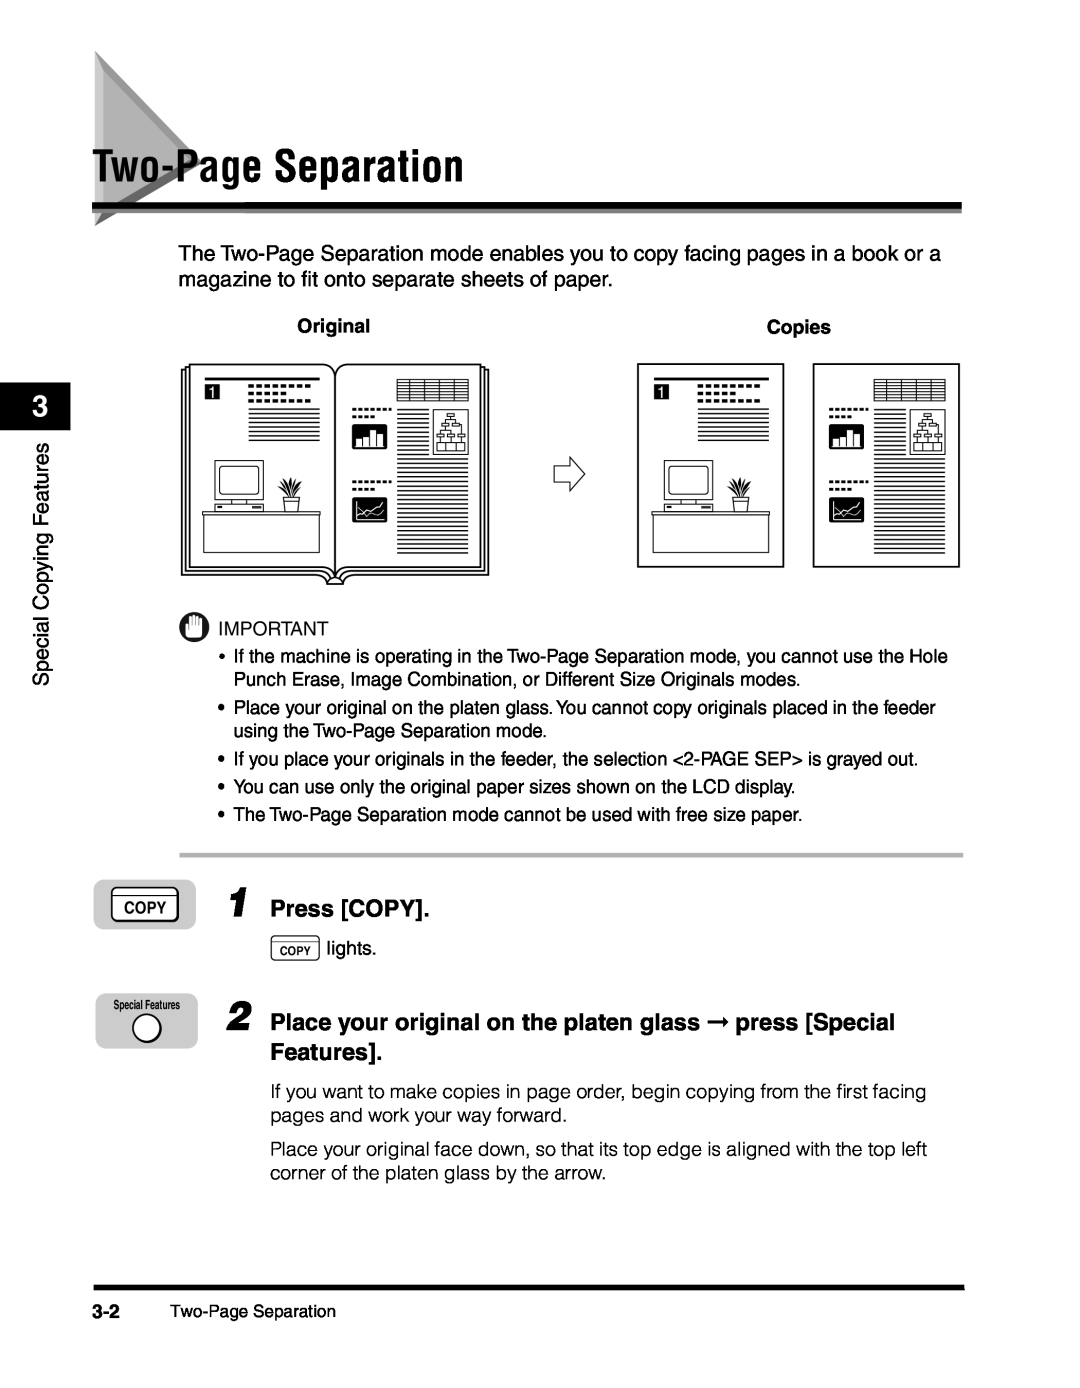 Canon 2010F Two-Page Separation, Features, Place your original on the platen glass press Special, Copies, Press COPY 